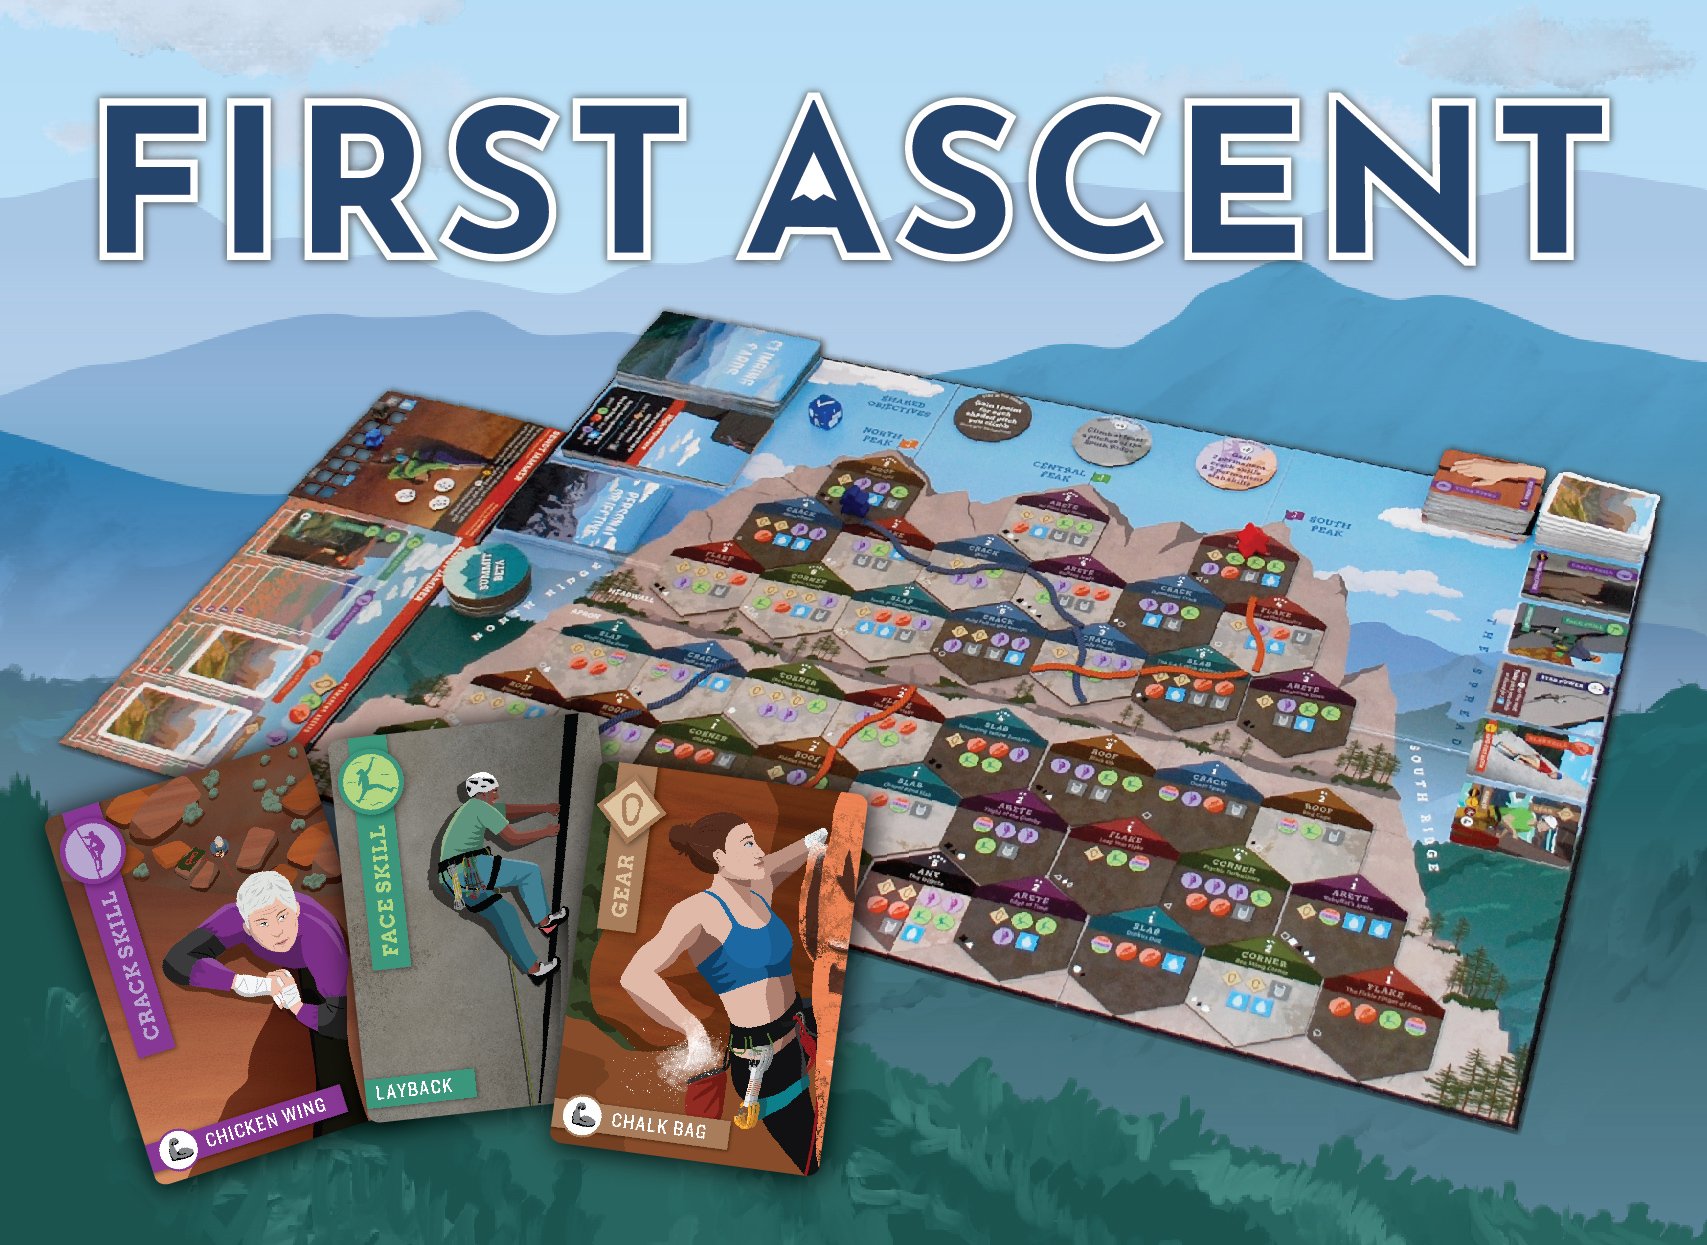 First Ascent Poster Tabletop Simulator.jpeg